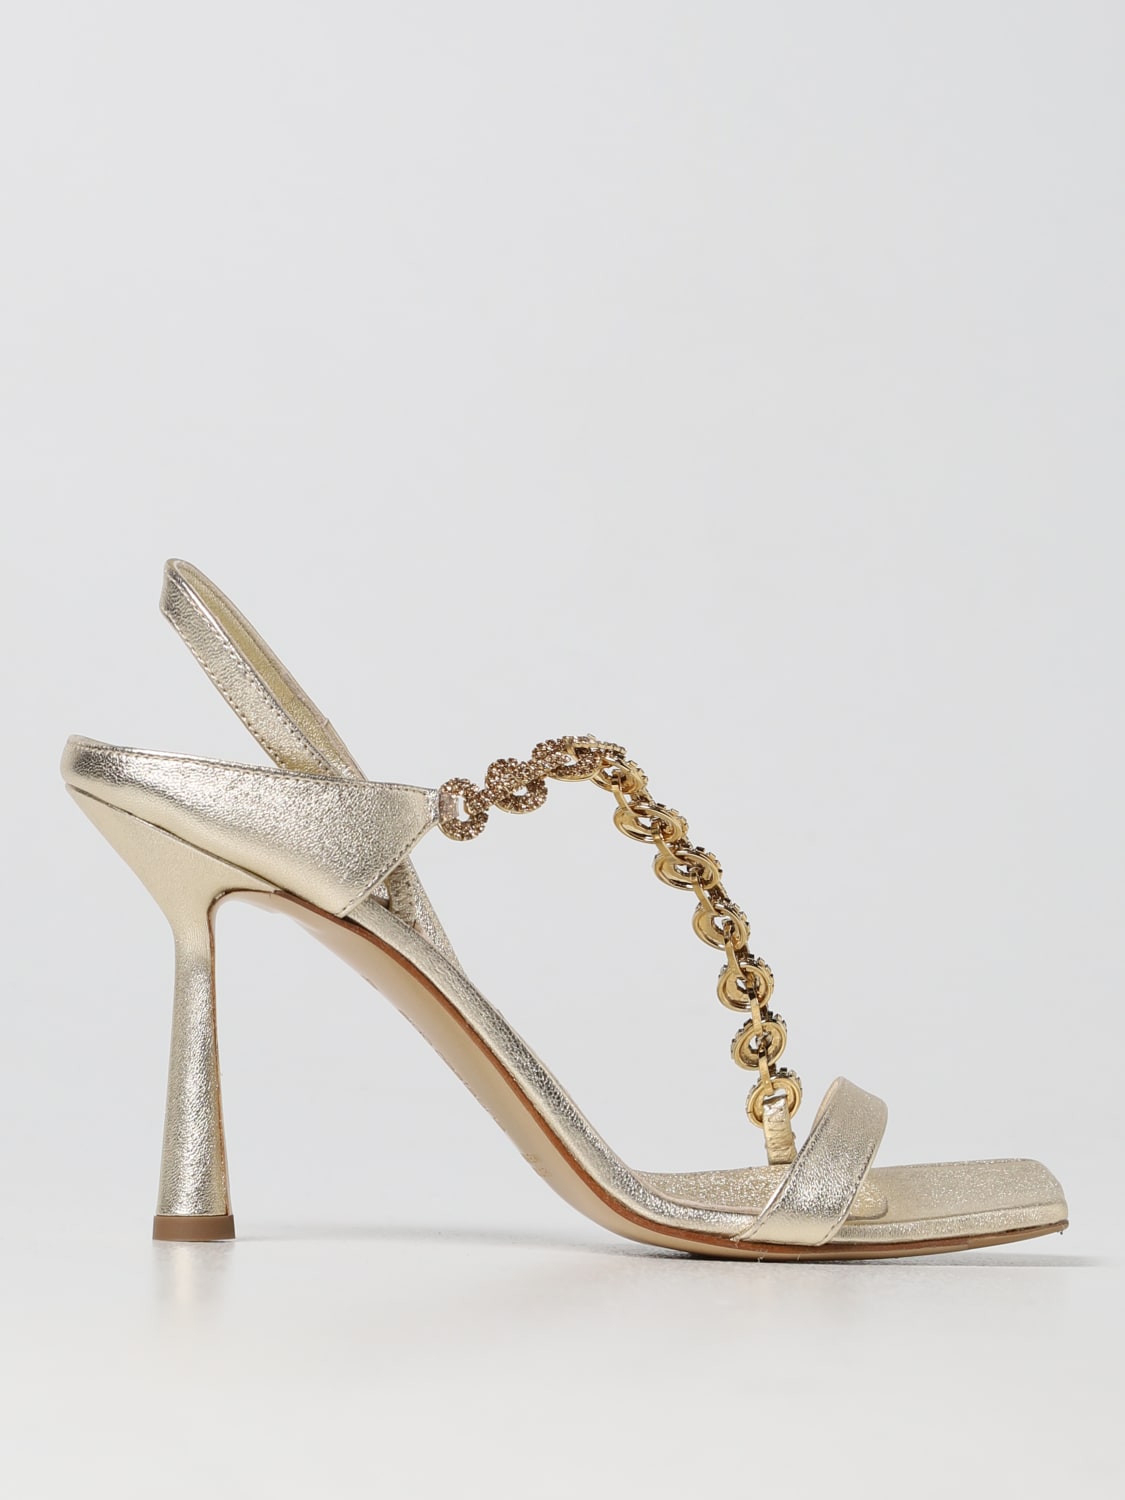 Castagna Outlet: heeled sandals for woman - Gold | Aldo Castagna heeled sandals RIHANNA on GIGLIO.COM